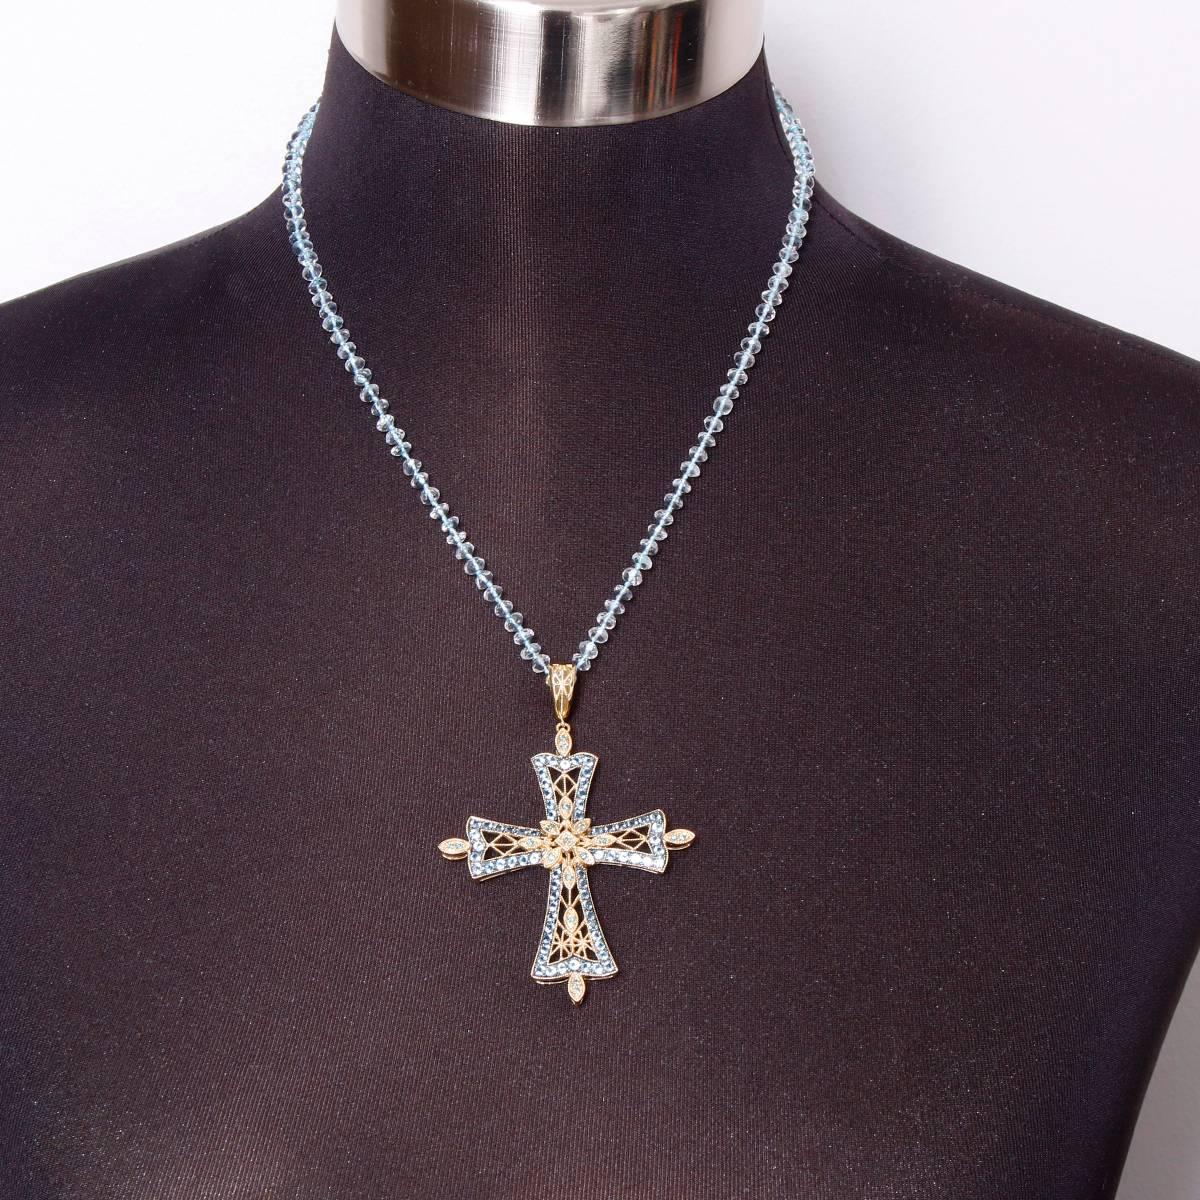 This necklace designed by Dallas Prince Designs features a cross pendant with a hinged removable bail. Pendant has 18 blue diamonds (0.36 ct.) in the center and at cross tips and features 70 blue topaz stones (3.50 ct.) outlining the cross set in